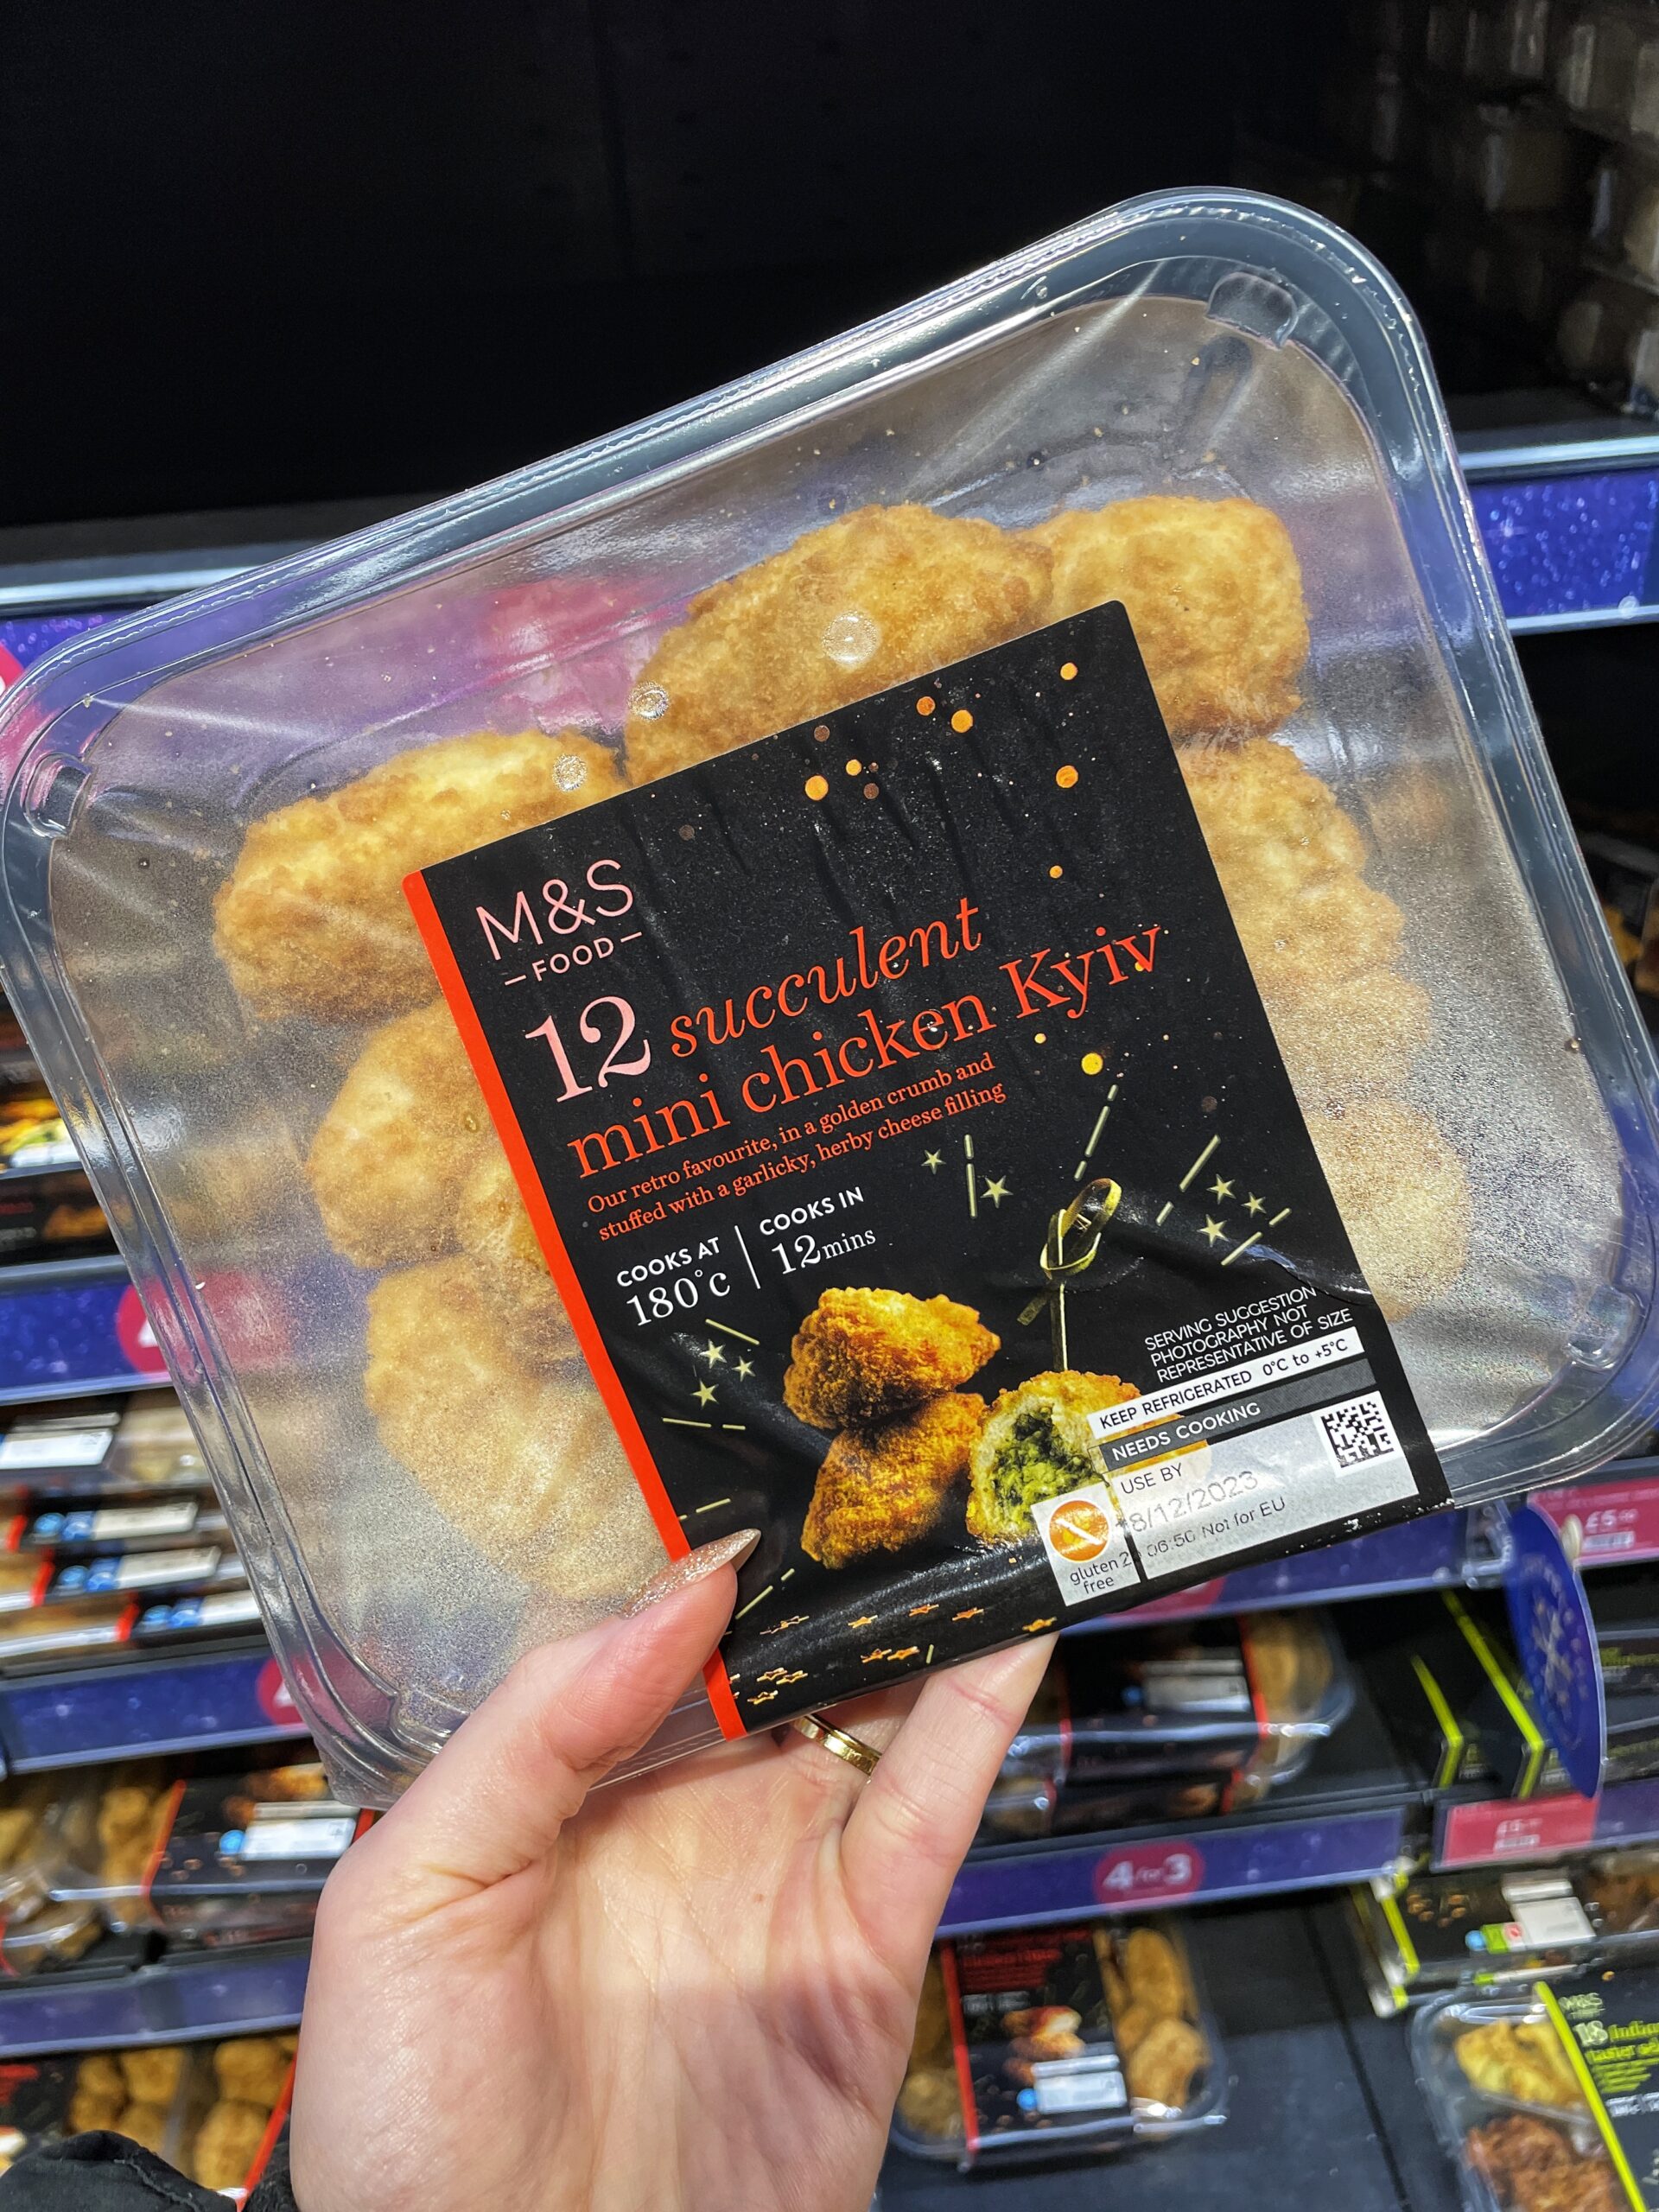 Mini Kyivs are in the M&S Christmas party food deal